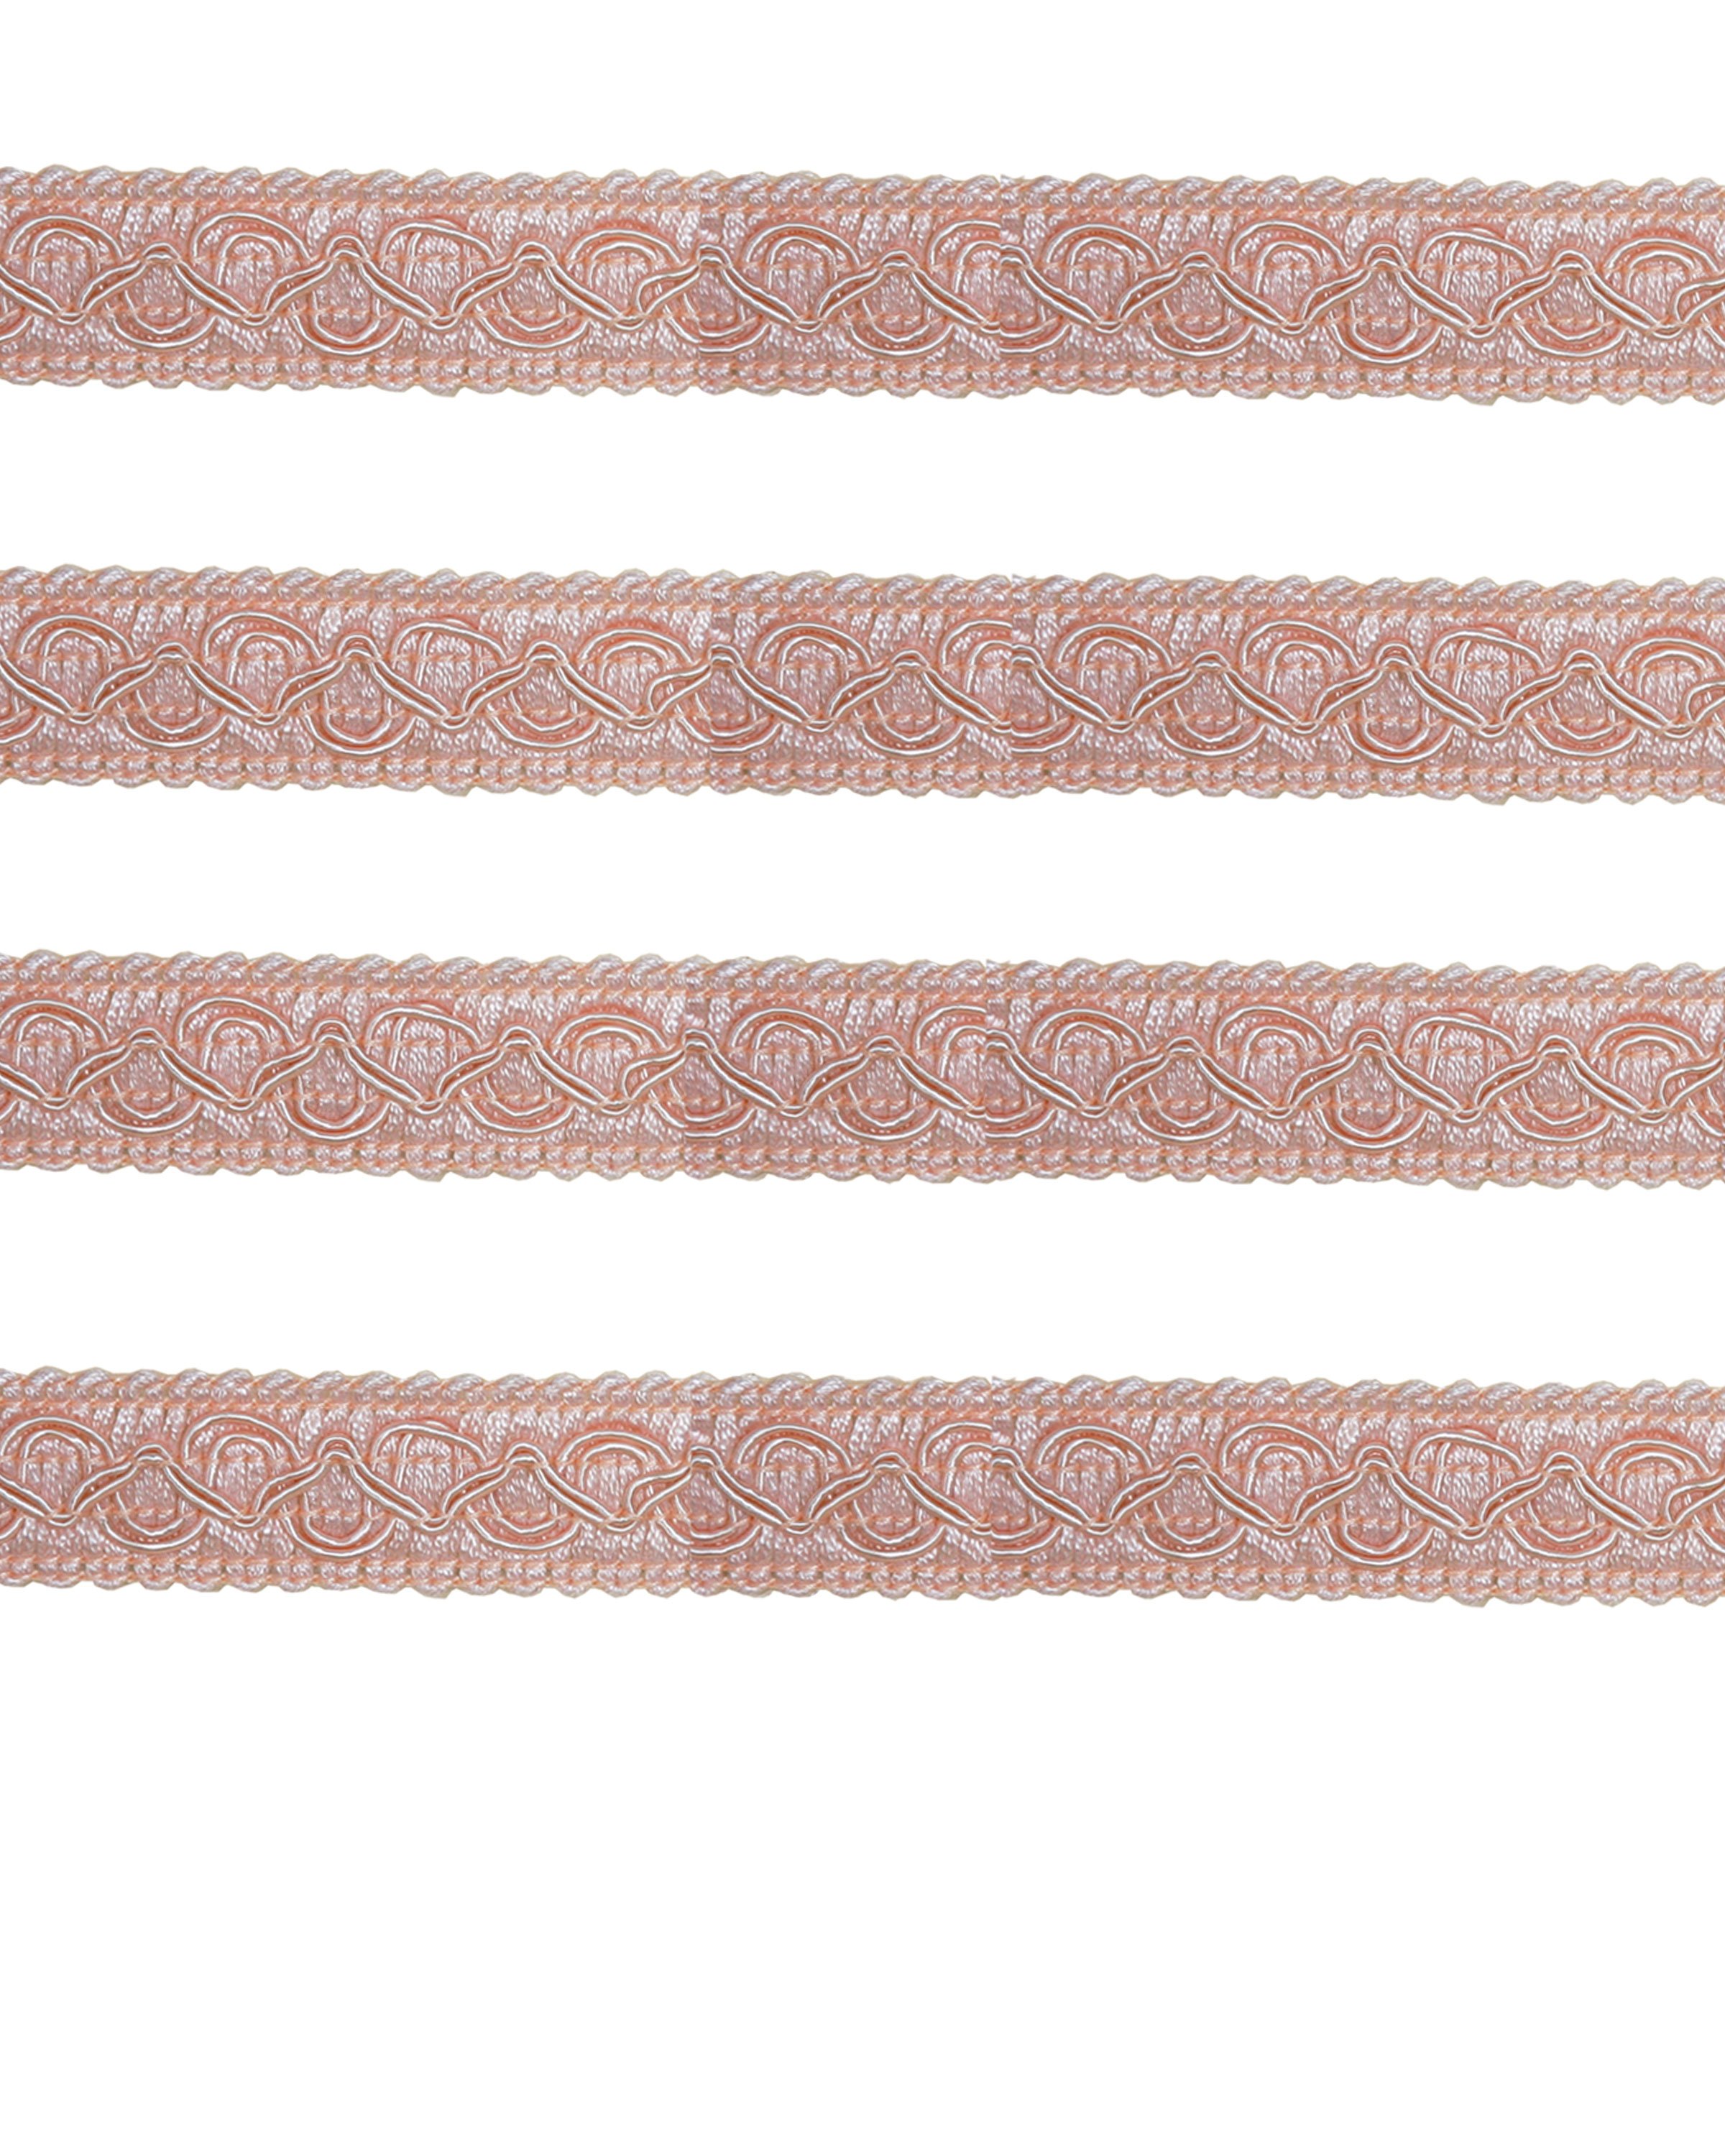 Fancy Braid - Pink 21mm Price is for 5 metres